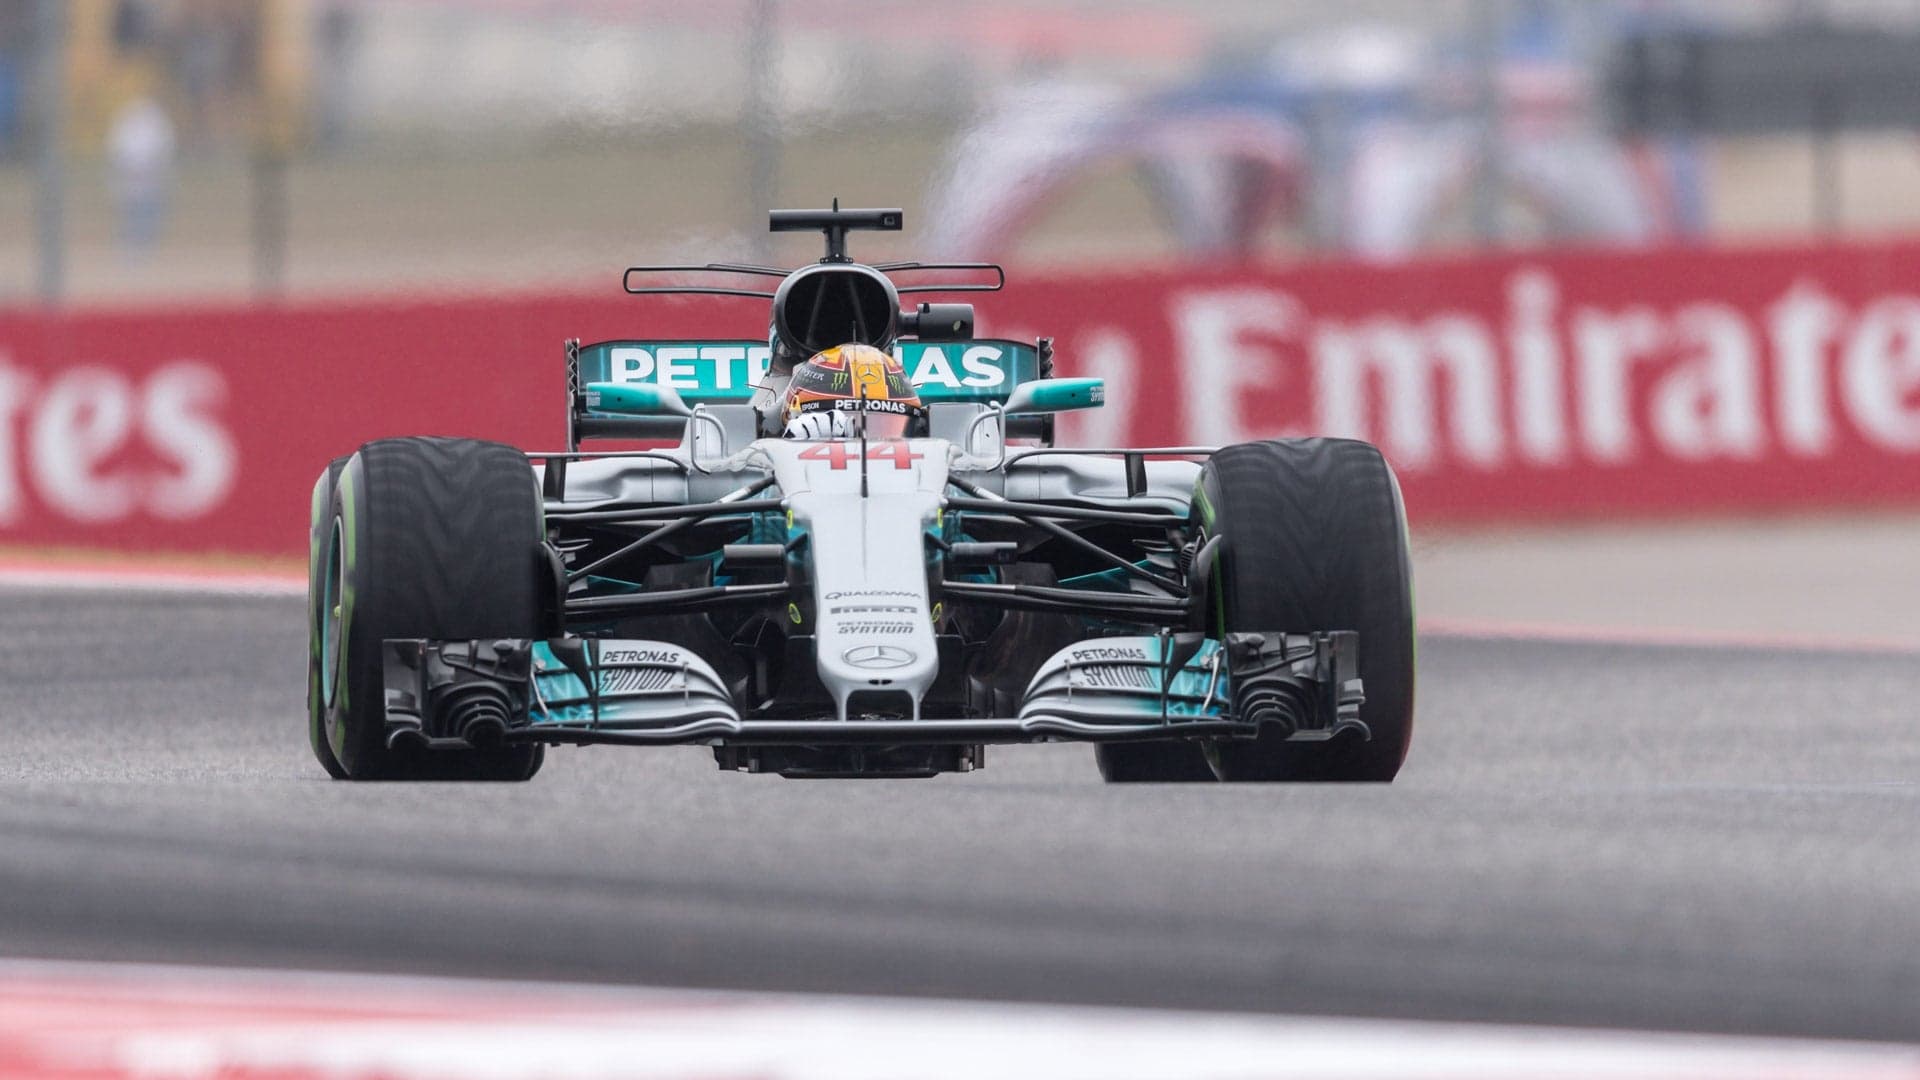 Lewis Hamilton Proves Fastest in FP1 at United States Grand Prix